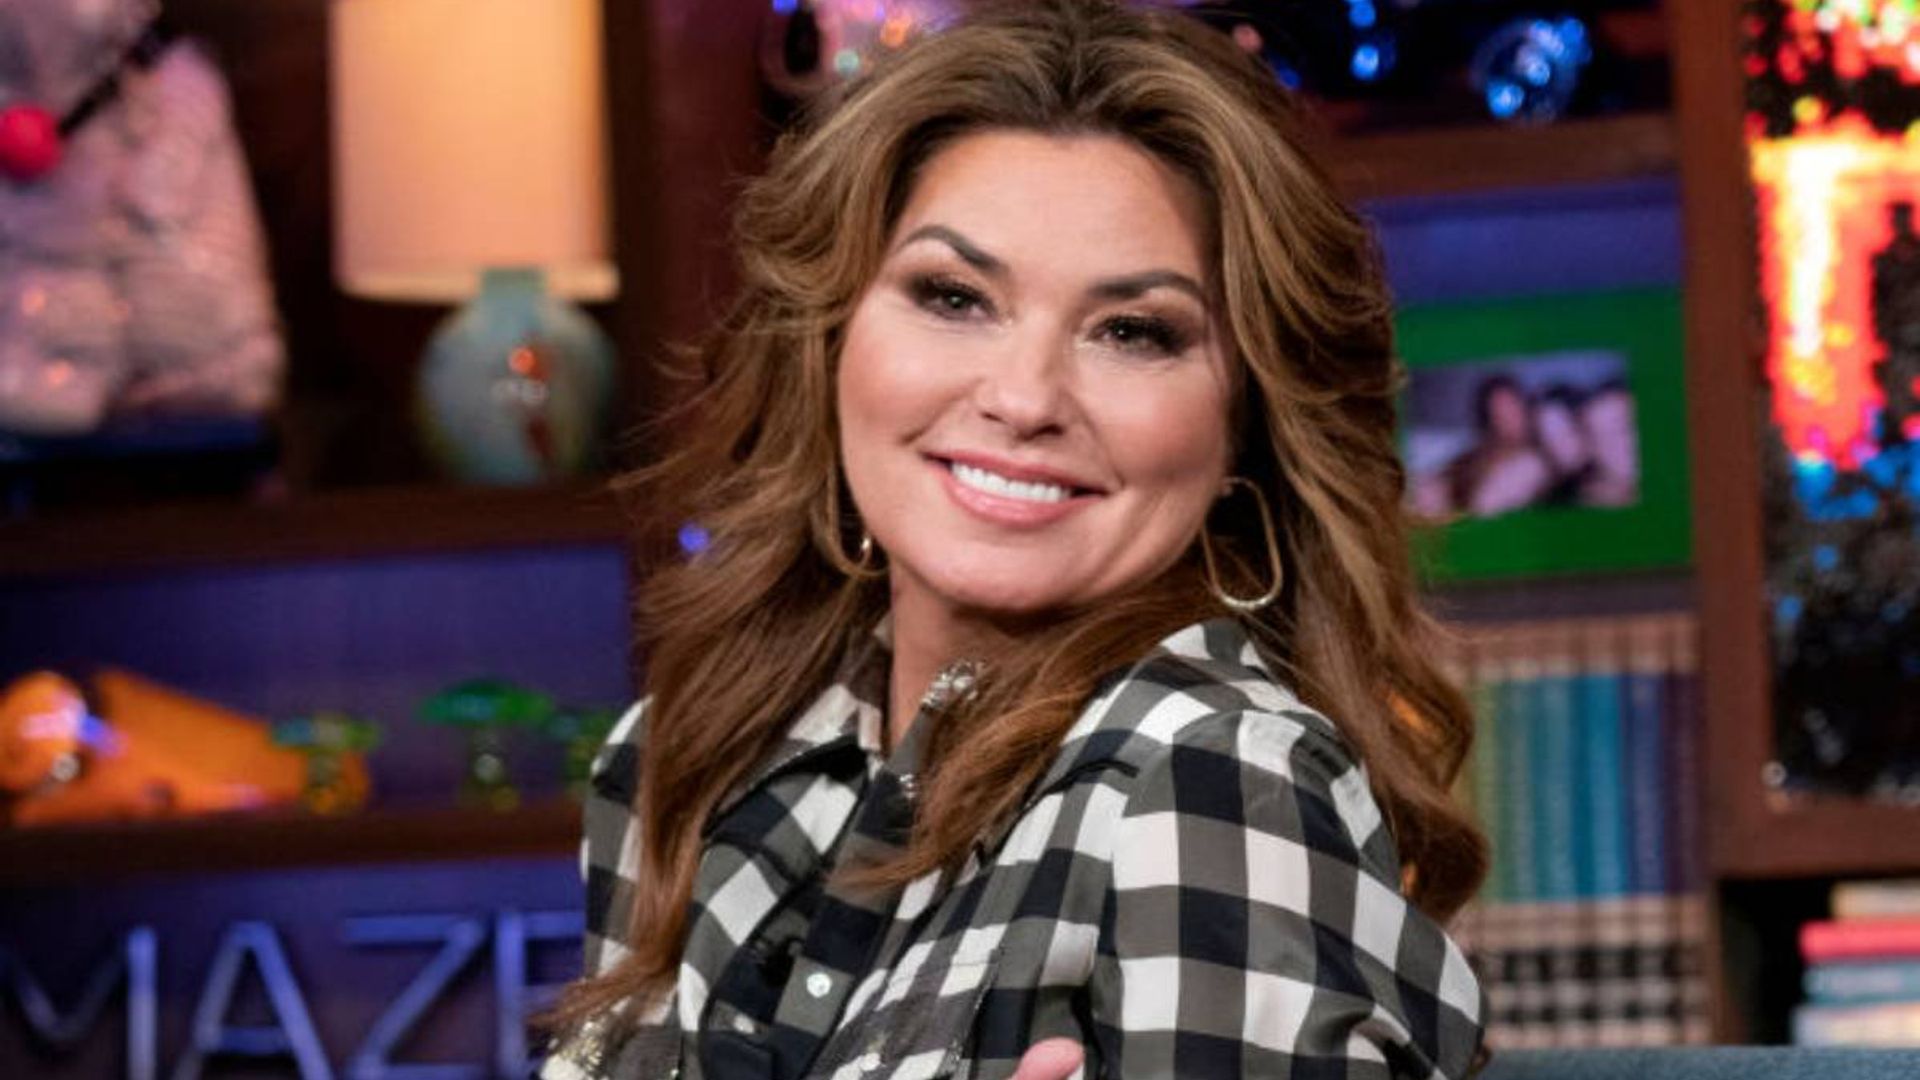 shania twain appearance before and after